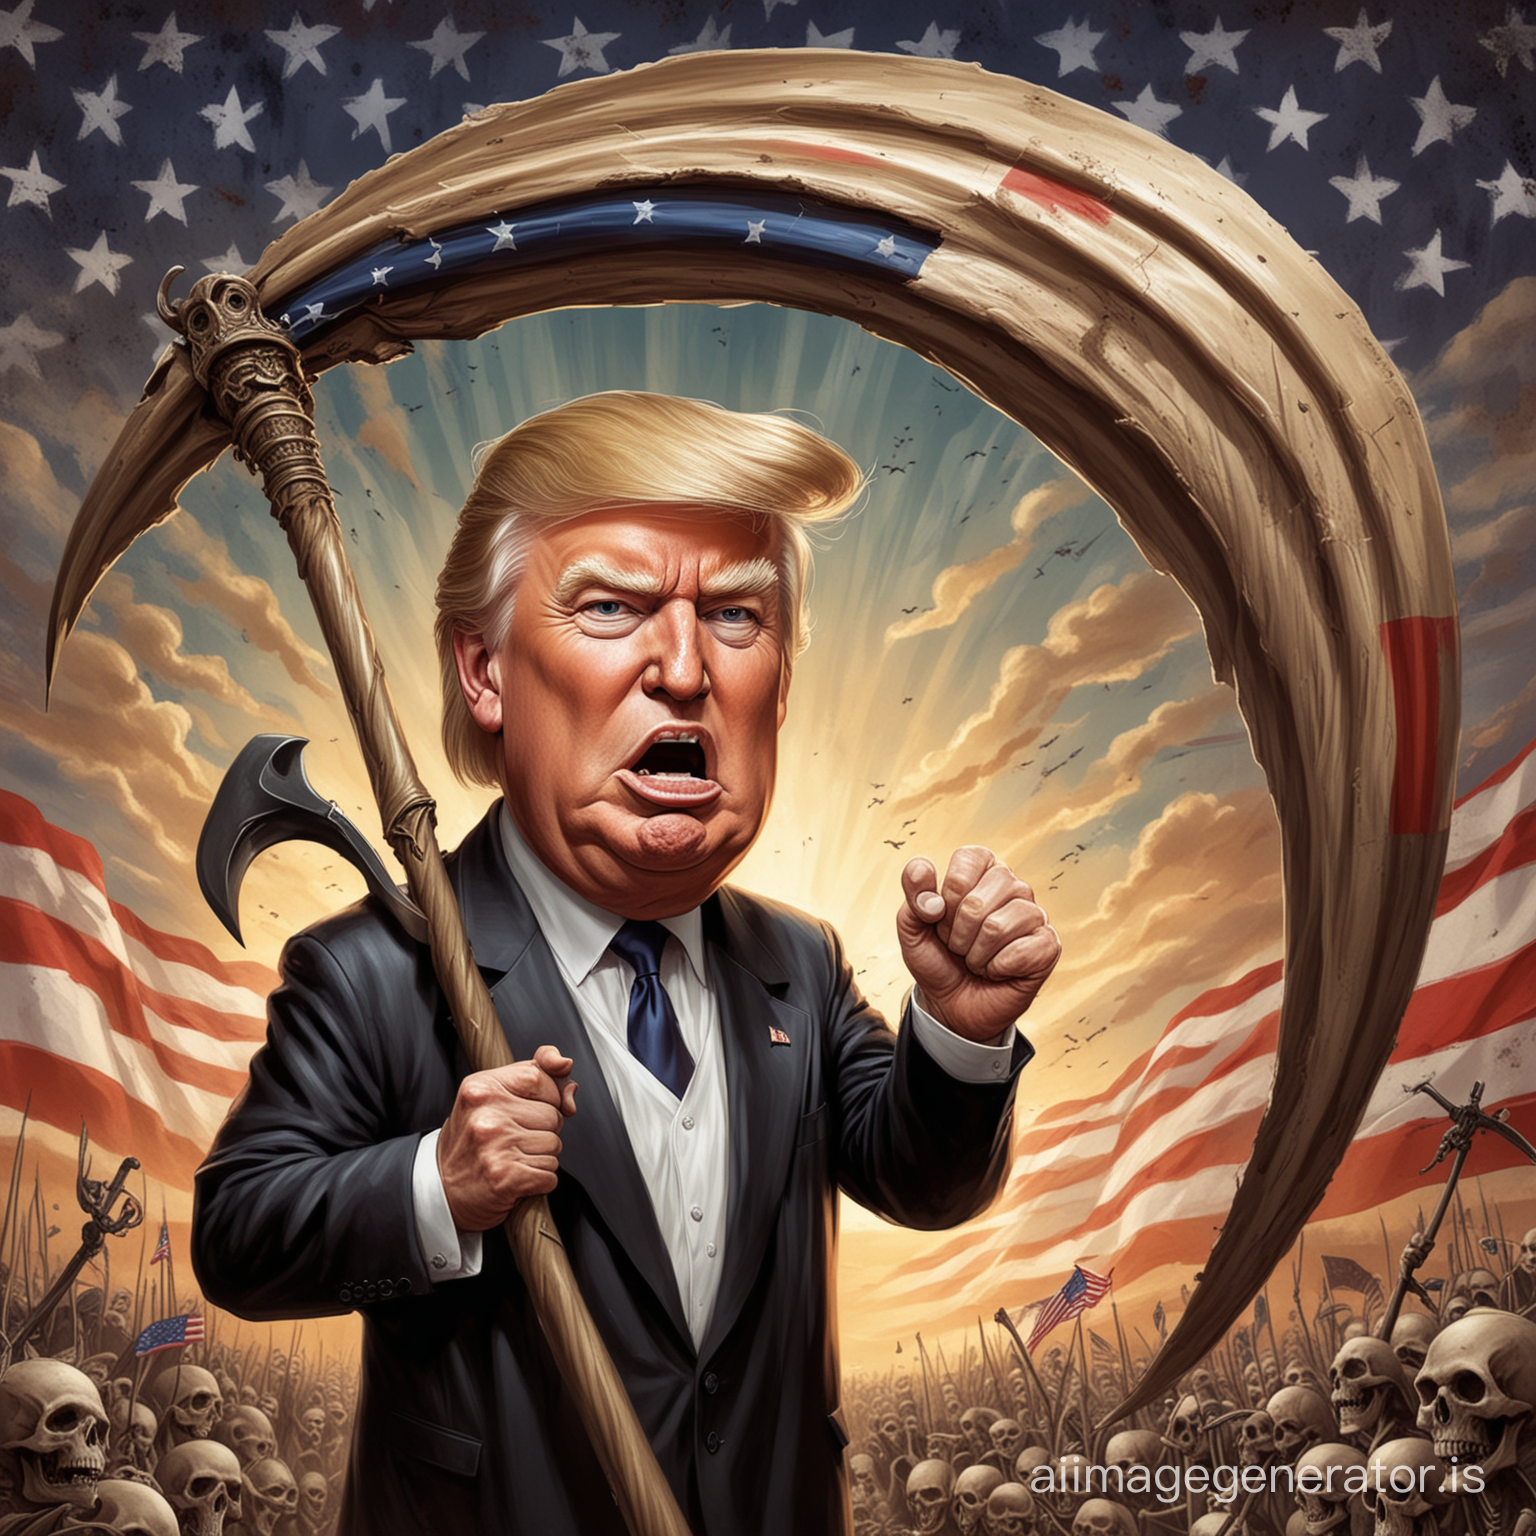 cartoon caricature of Donald Trump holding the grim reaper's scythe with a patriotic background
